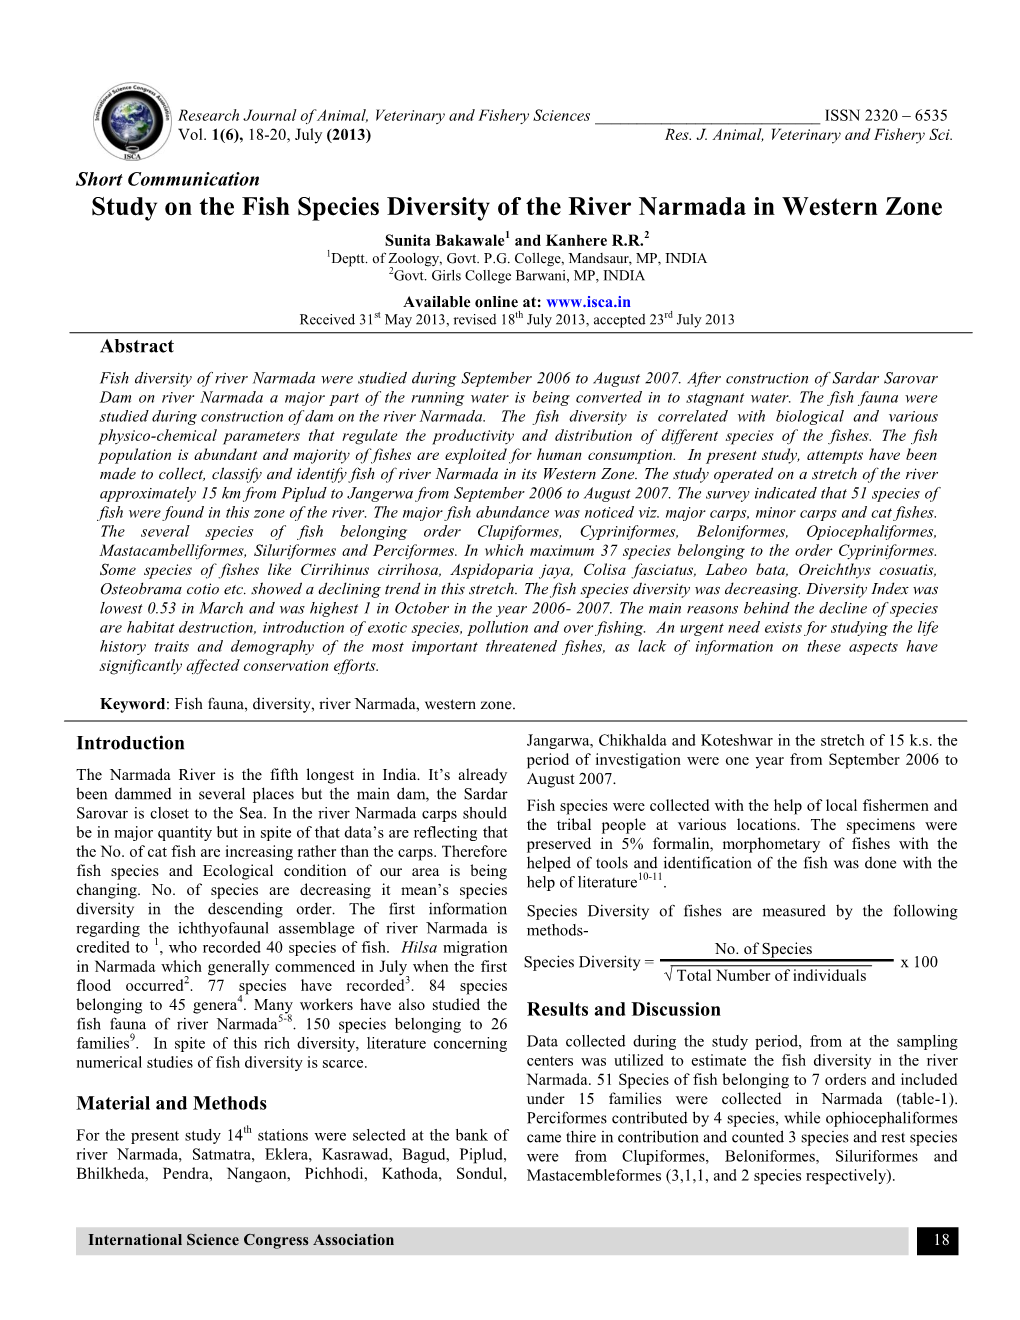 Study on the Fish Species Diversity of the River Narmada in Western Zone